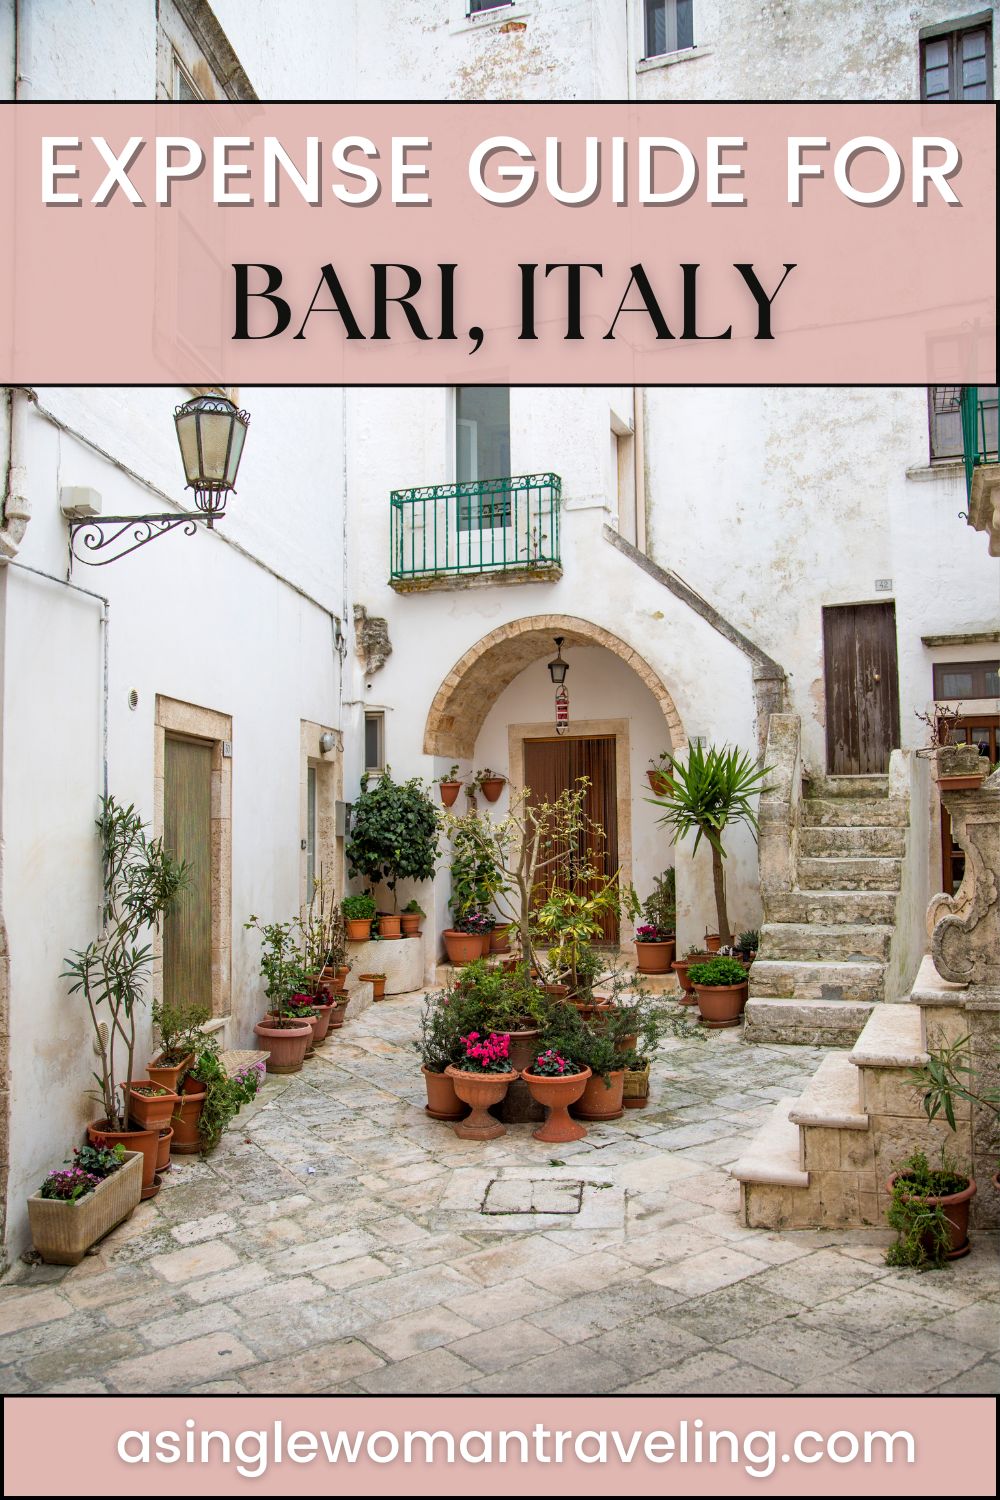 A promotional graphic titled 'Expense Guide for Bari, Italy' with a photo of a charming courtyard in Bari. The courtyard features white-washed buildings, potted plants, an arched doorway, a balcony with a green railing, and stone steps. The bottom of the graphic includes the website URL 'asinglewomantraveling.com'.